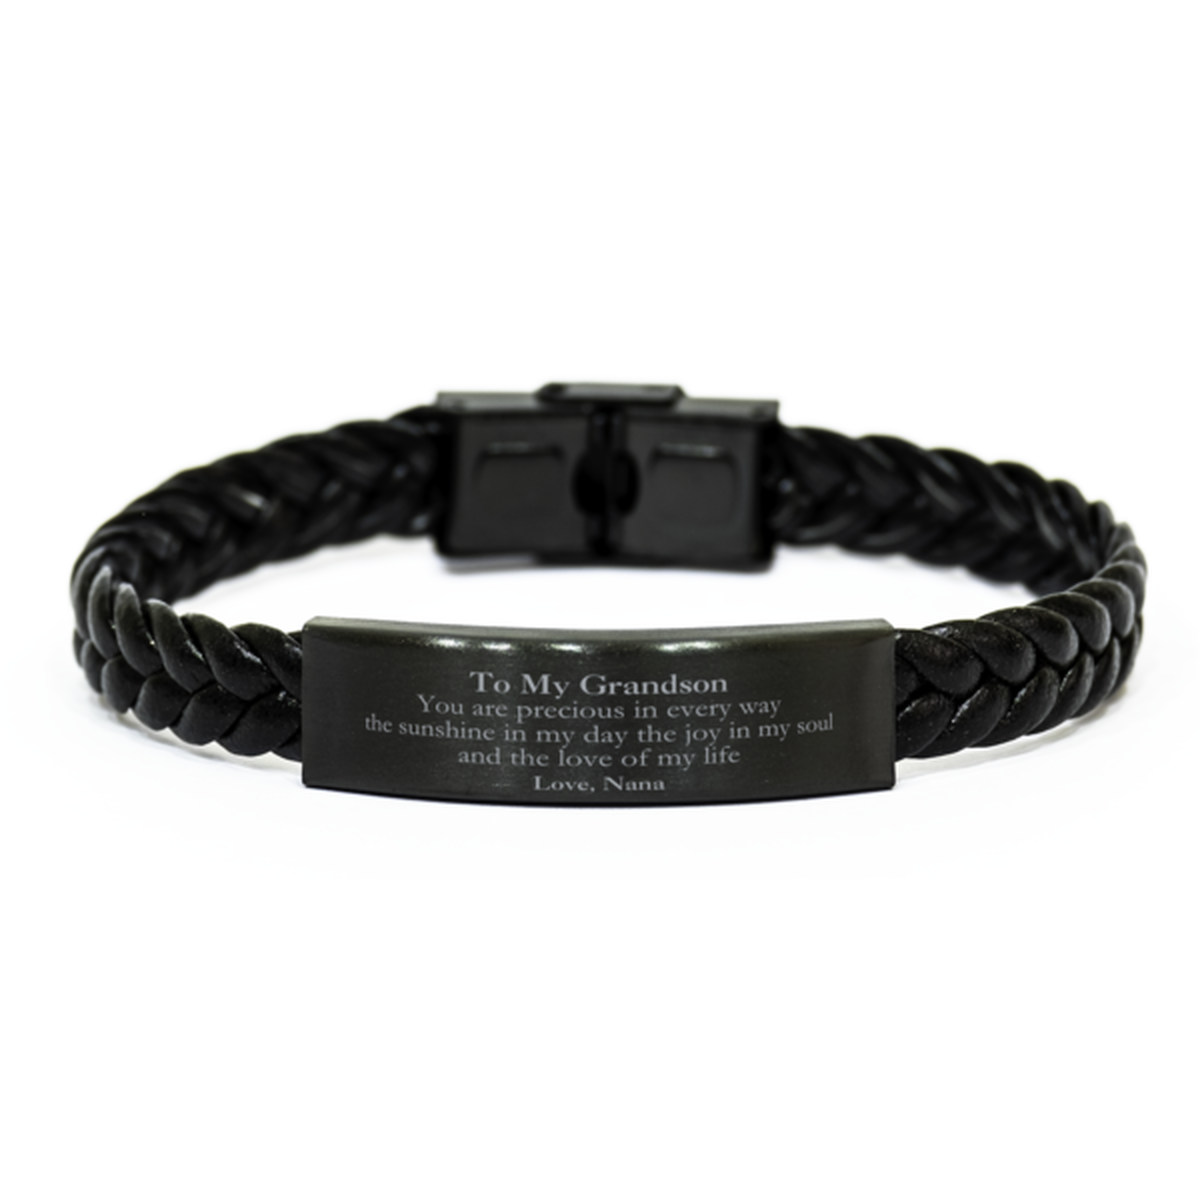 Graduation Gifts for Grandson Braided Leather Bracelet Present from Nana, Christmas Grandson Birthday Gifts Grandson You are precious in every way the sunshine in my day. Love, Nana